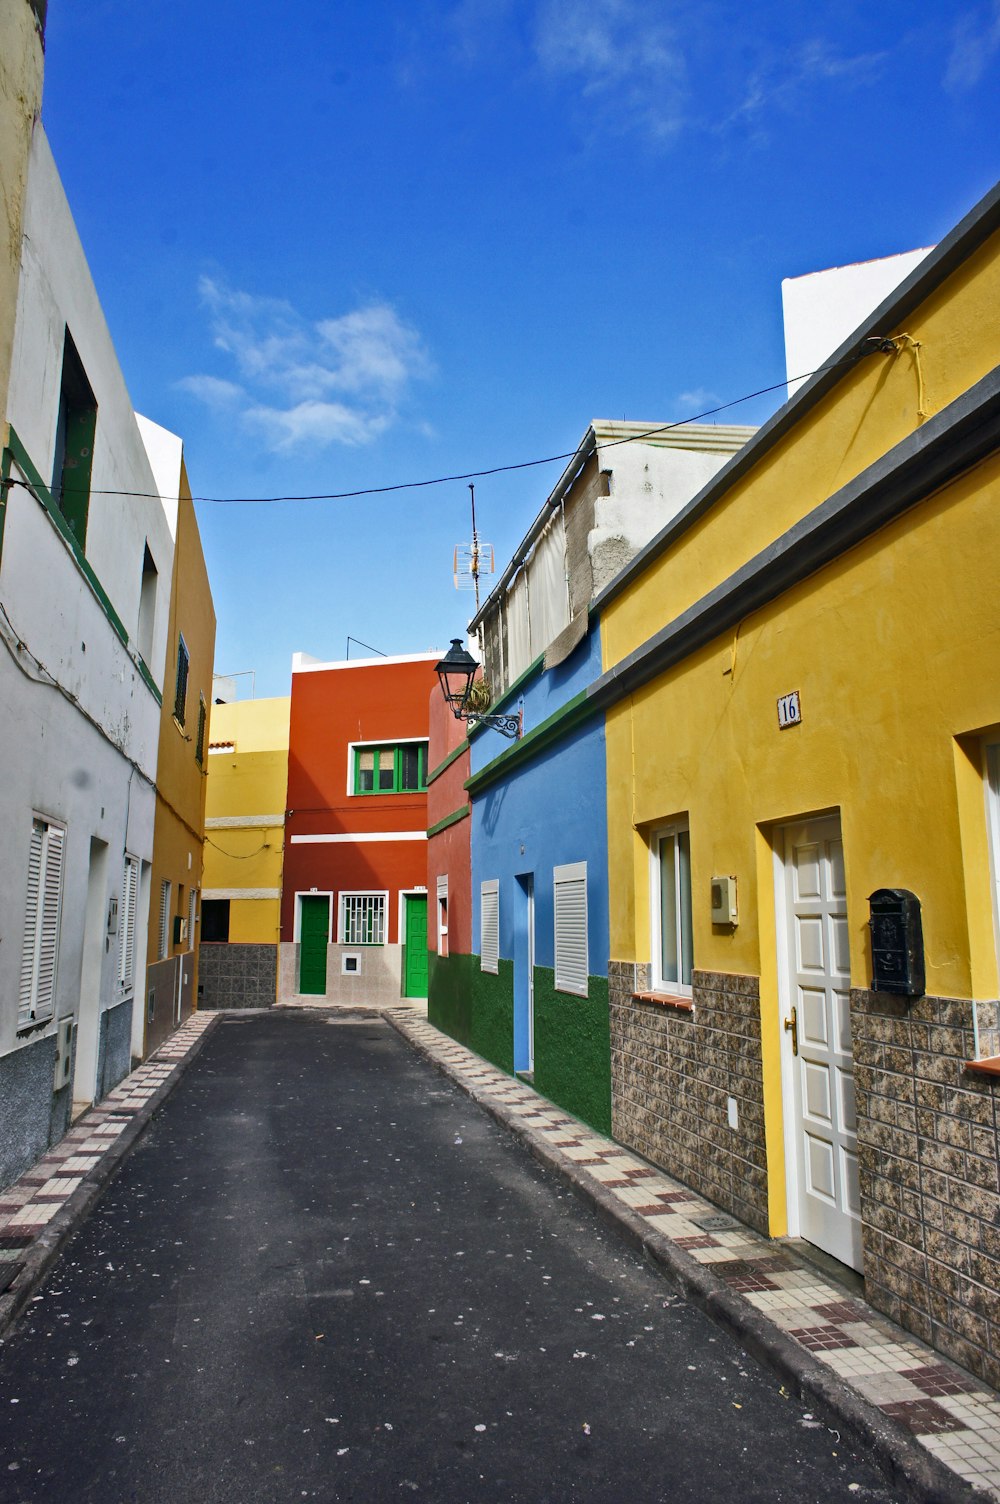 a narrow street with buildings painted in different colors